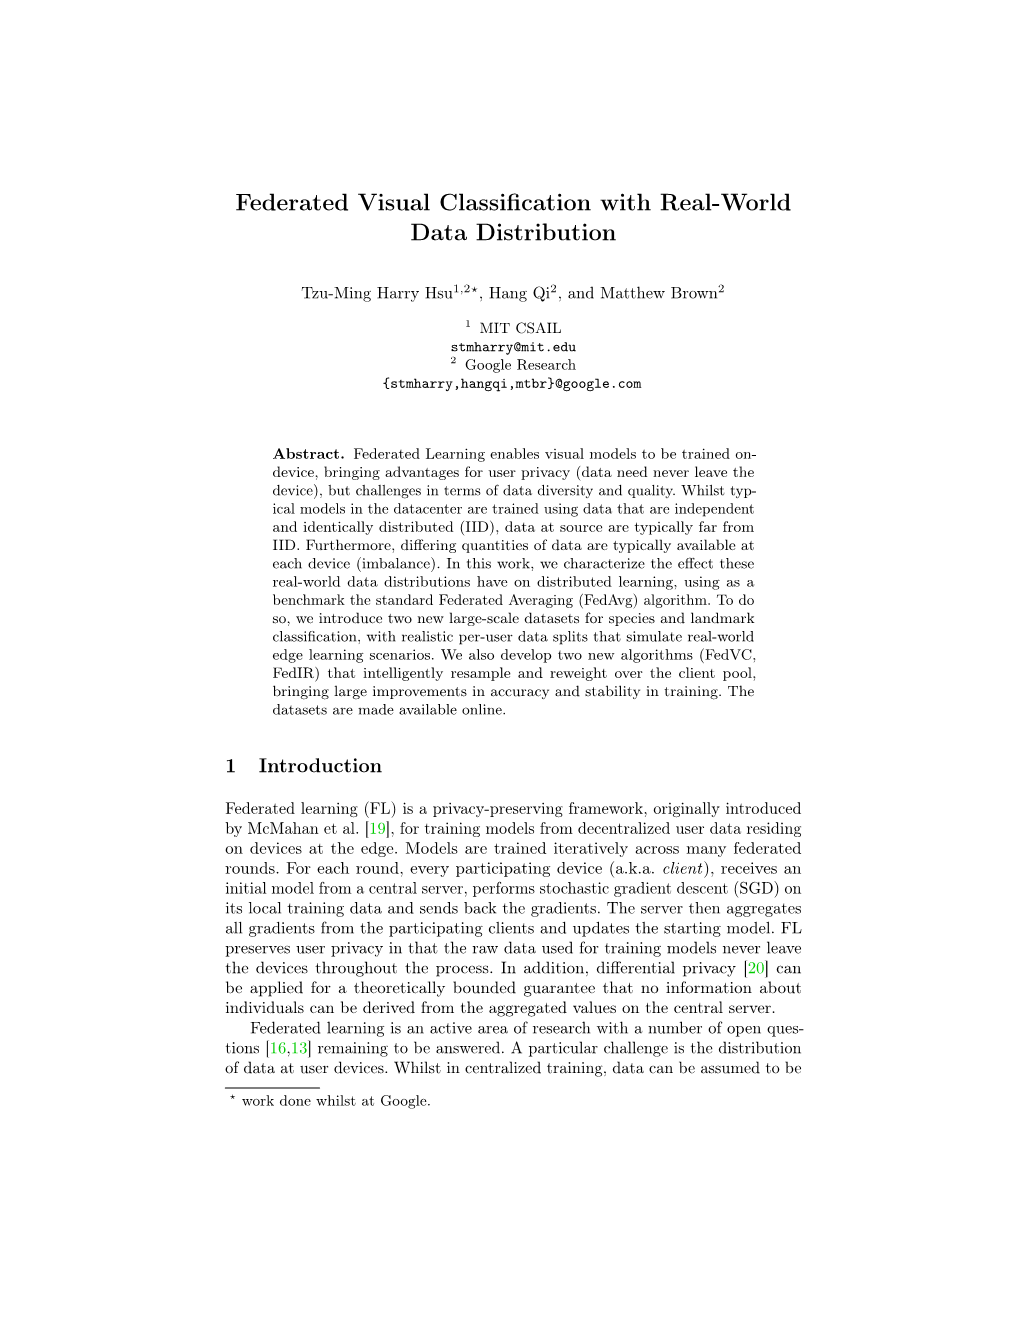 Federated Visual Classification with Real-World Data Distribution